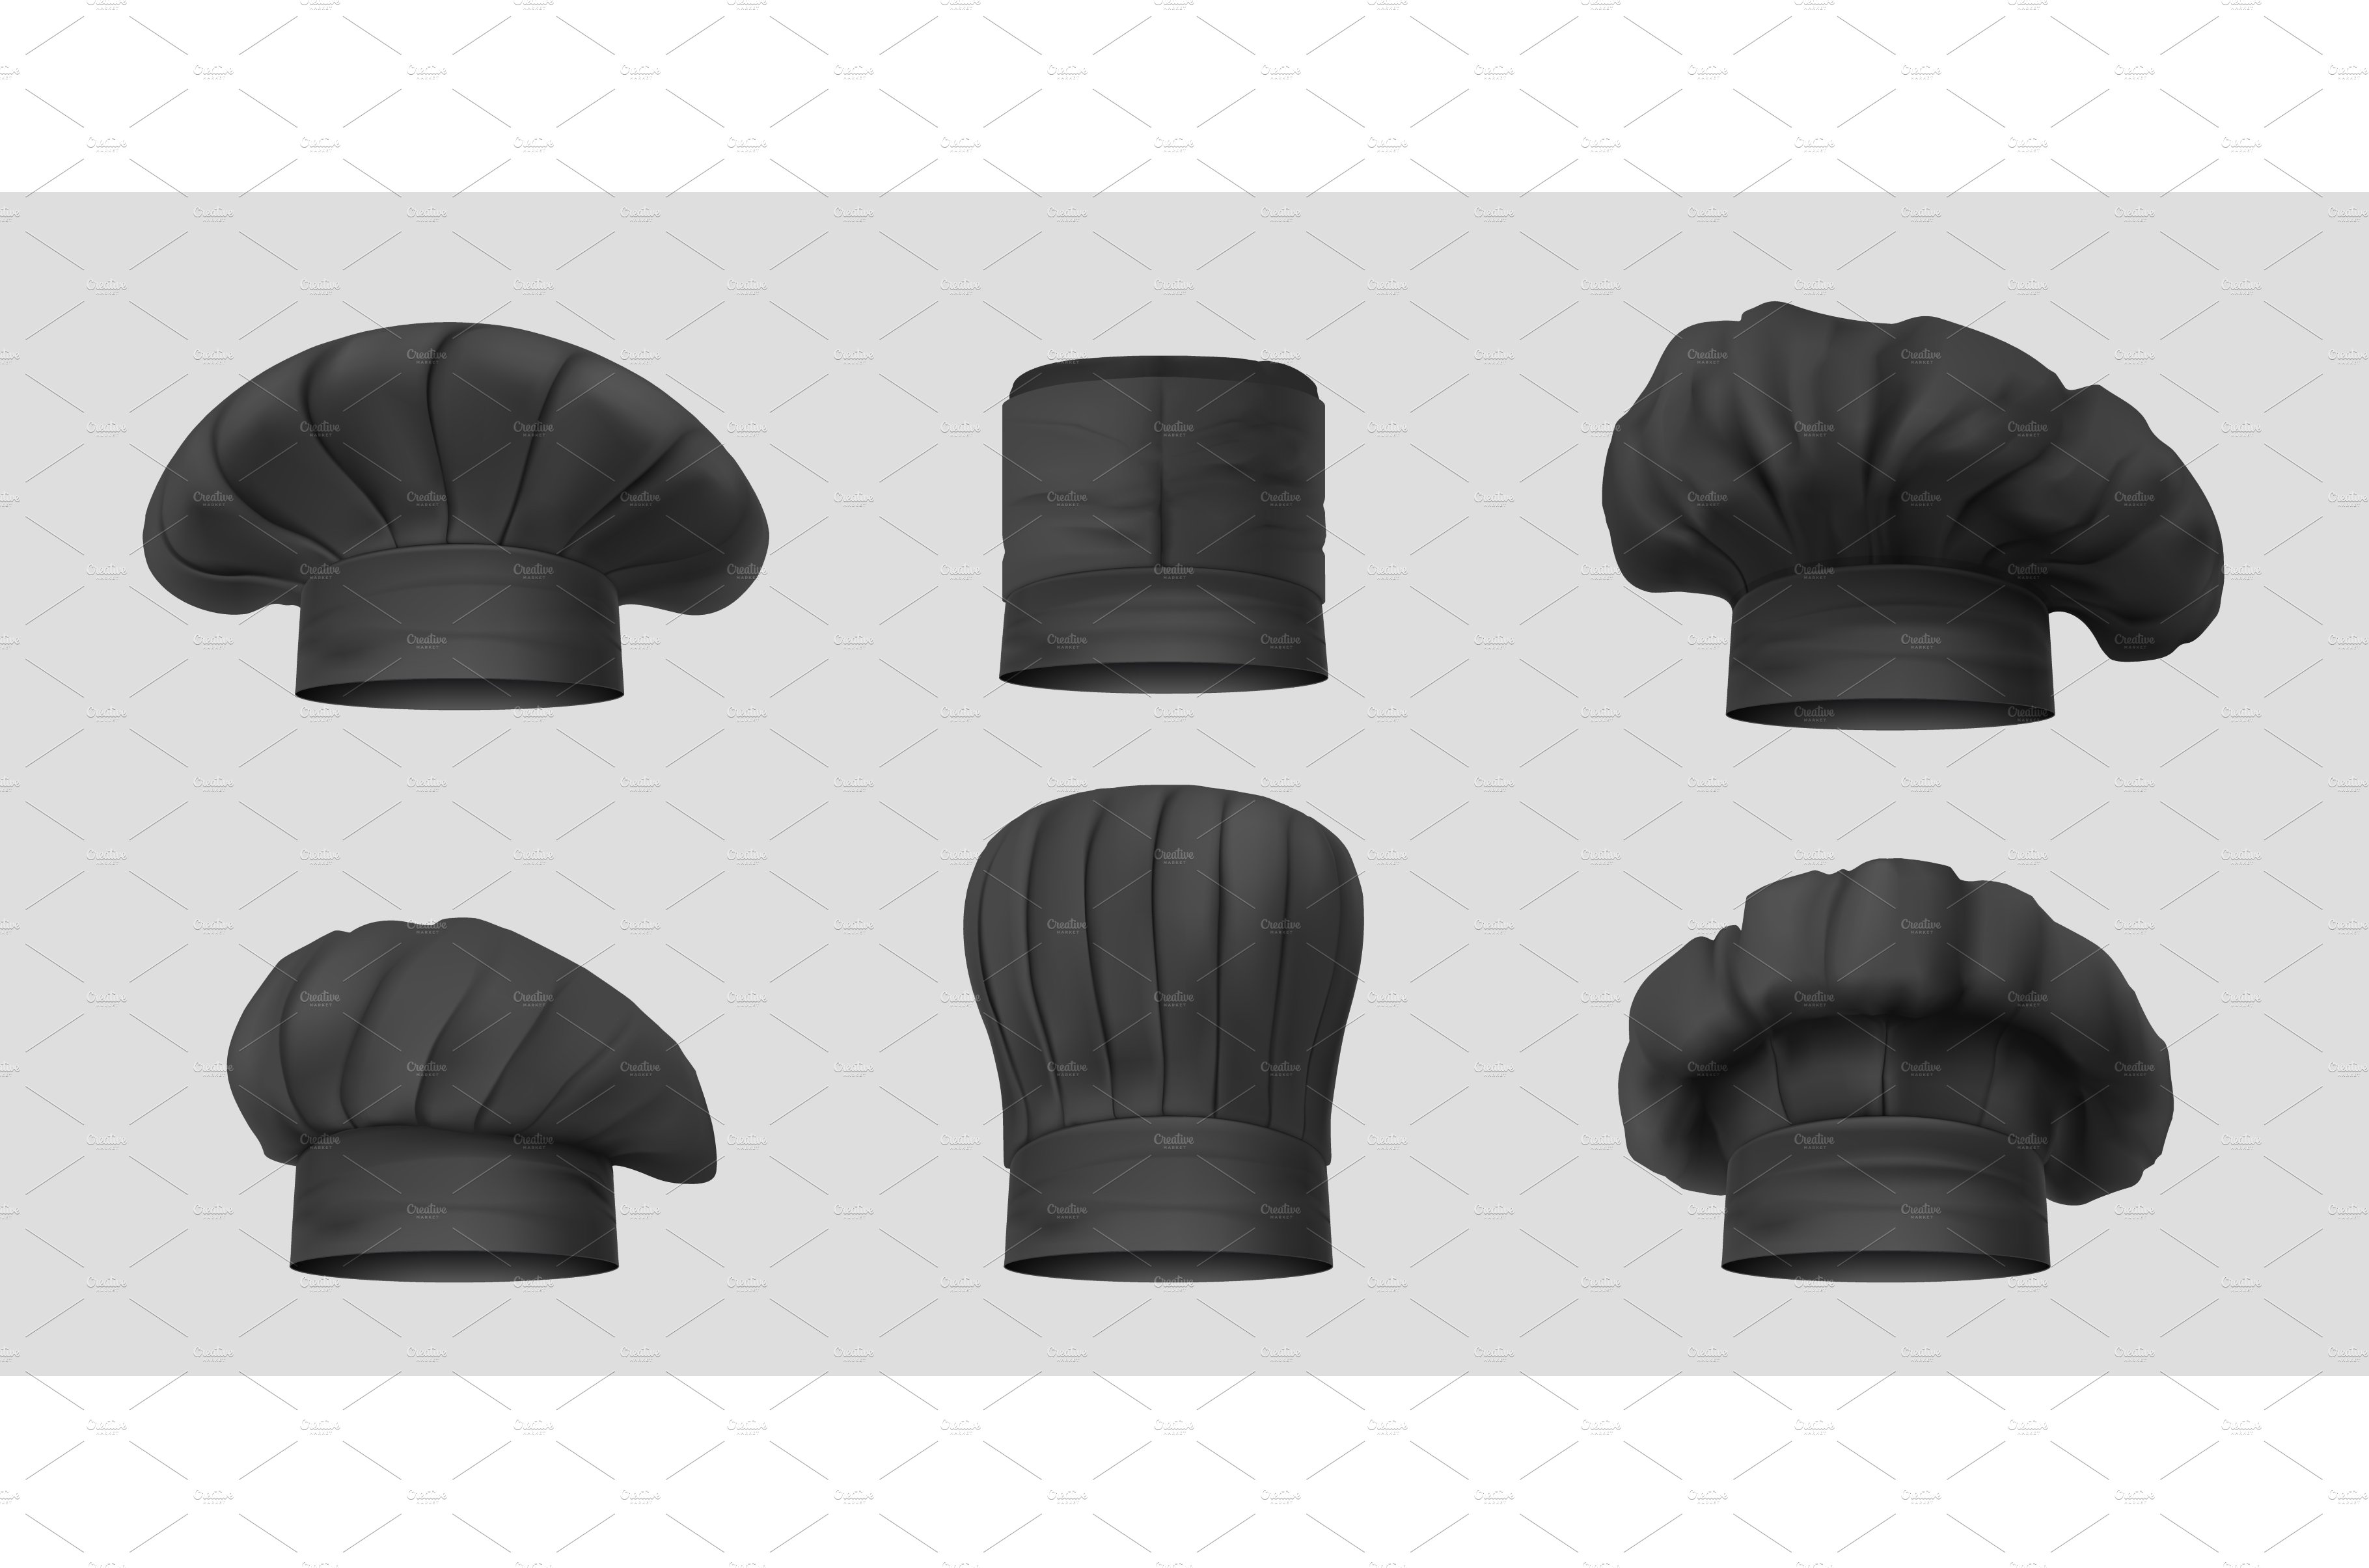 Mockup black headwear for the chef cover image.